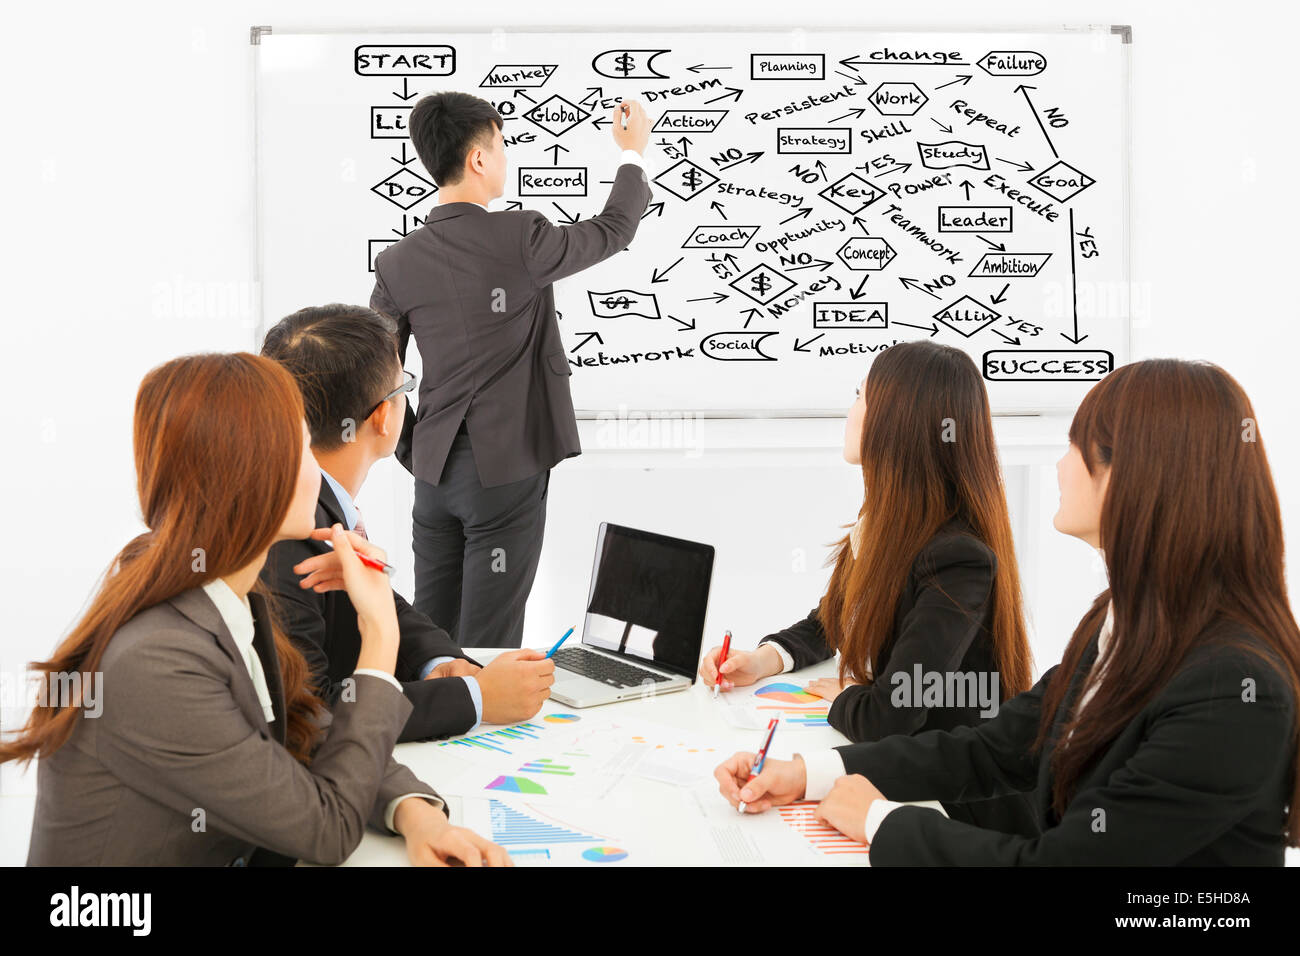 Businessman drawing a successful planning chart Stock Photo